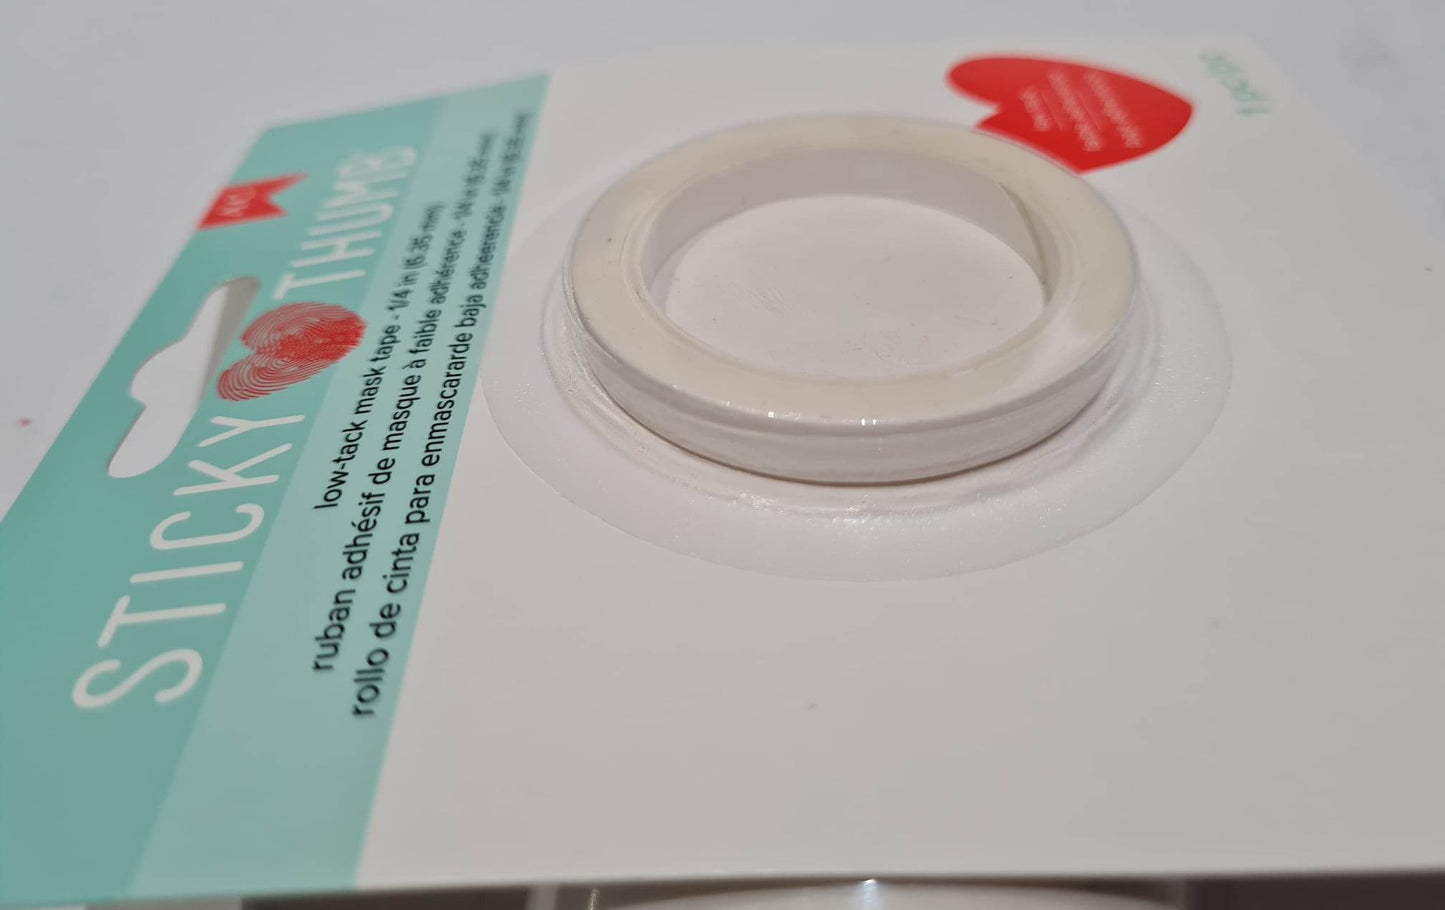 Sticky Thumb - Low Tack Masking Tape 1/4 inch